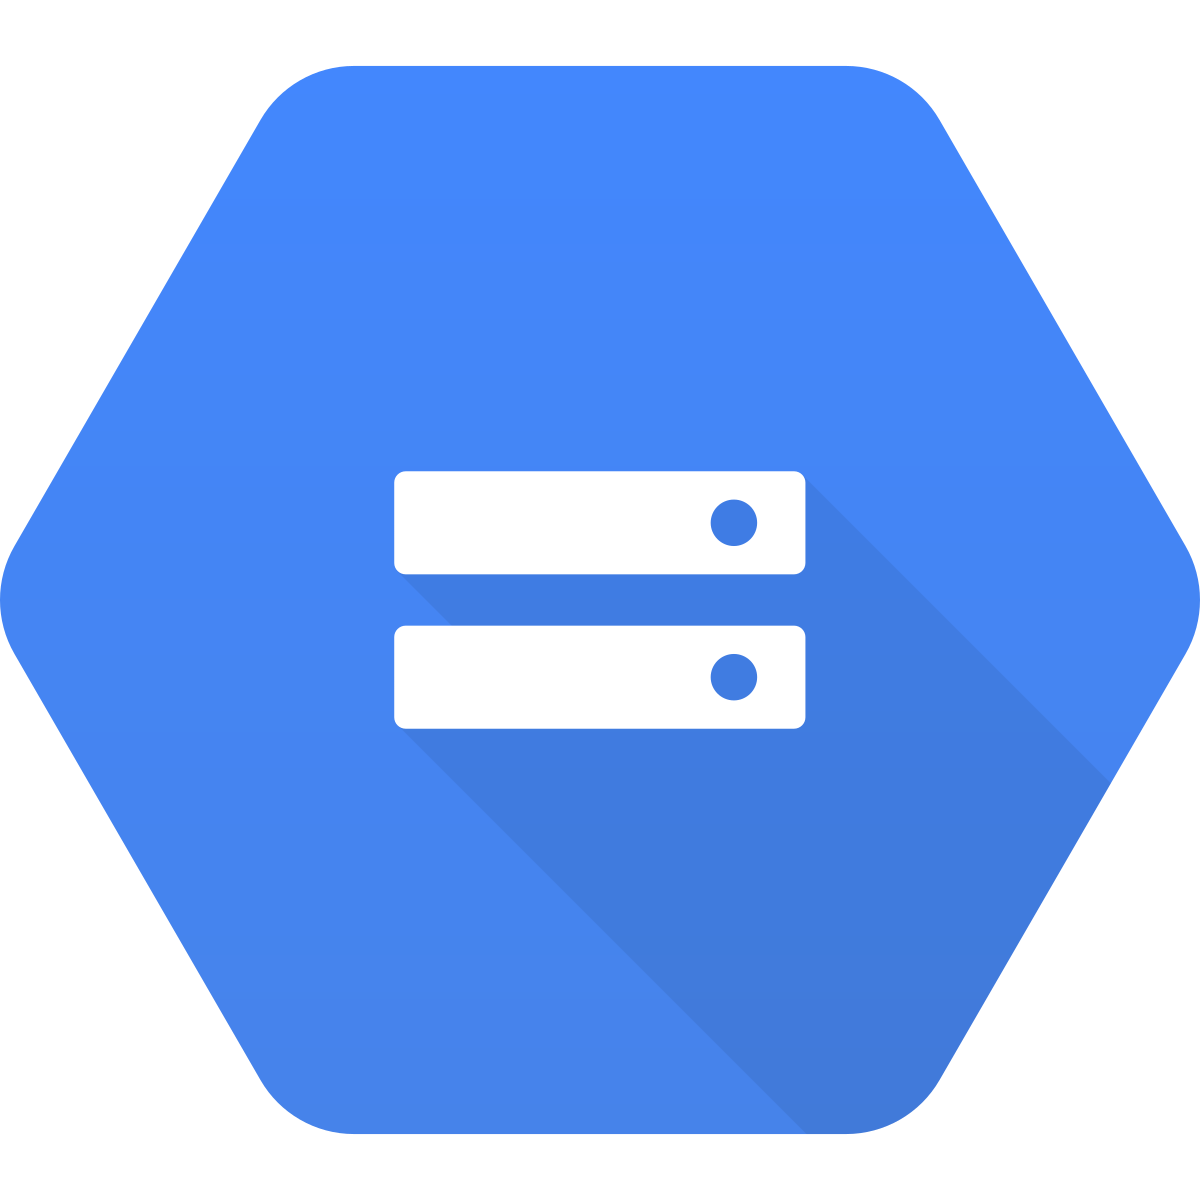 Sync data from Google Cloud Storage to Mixpanel.